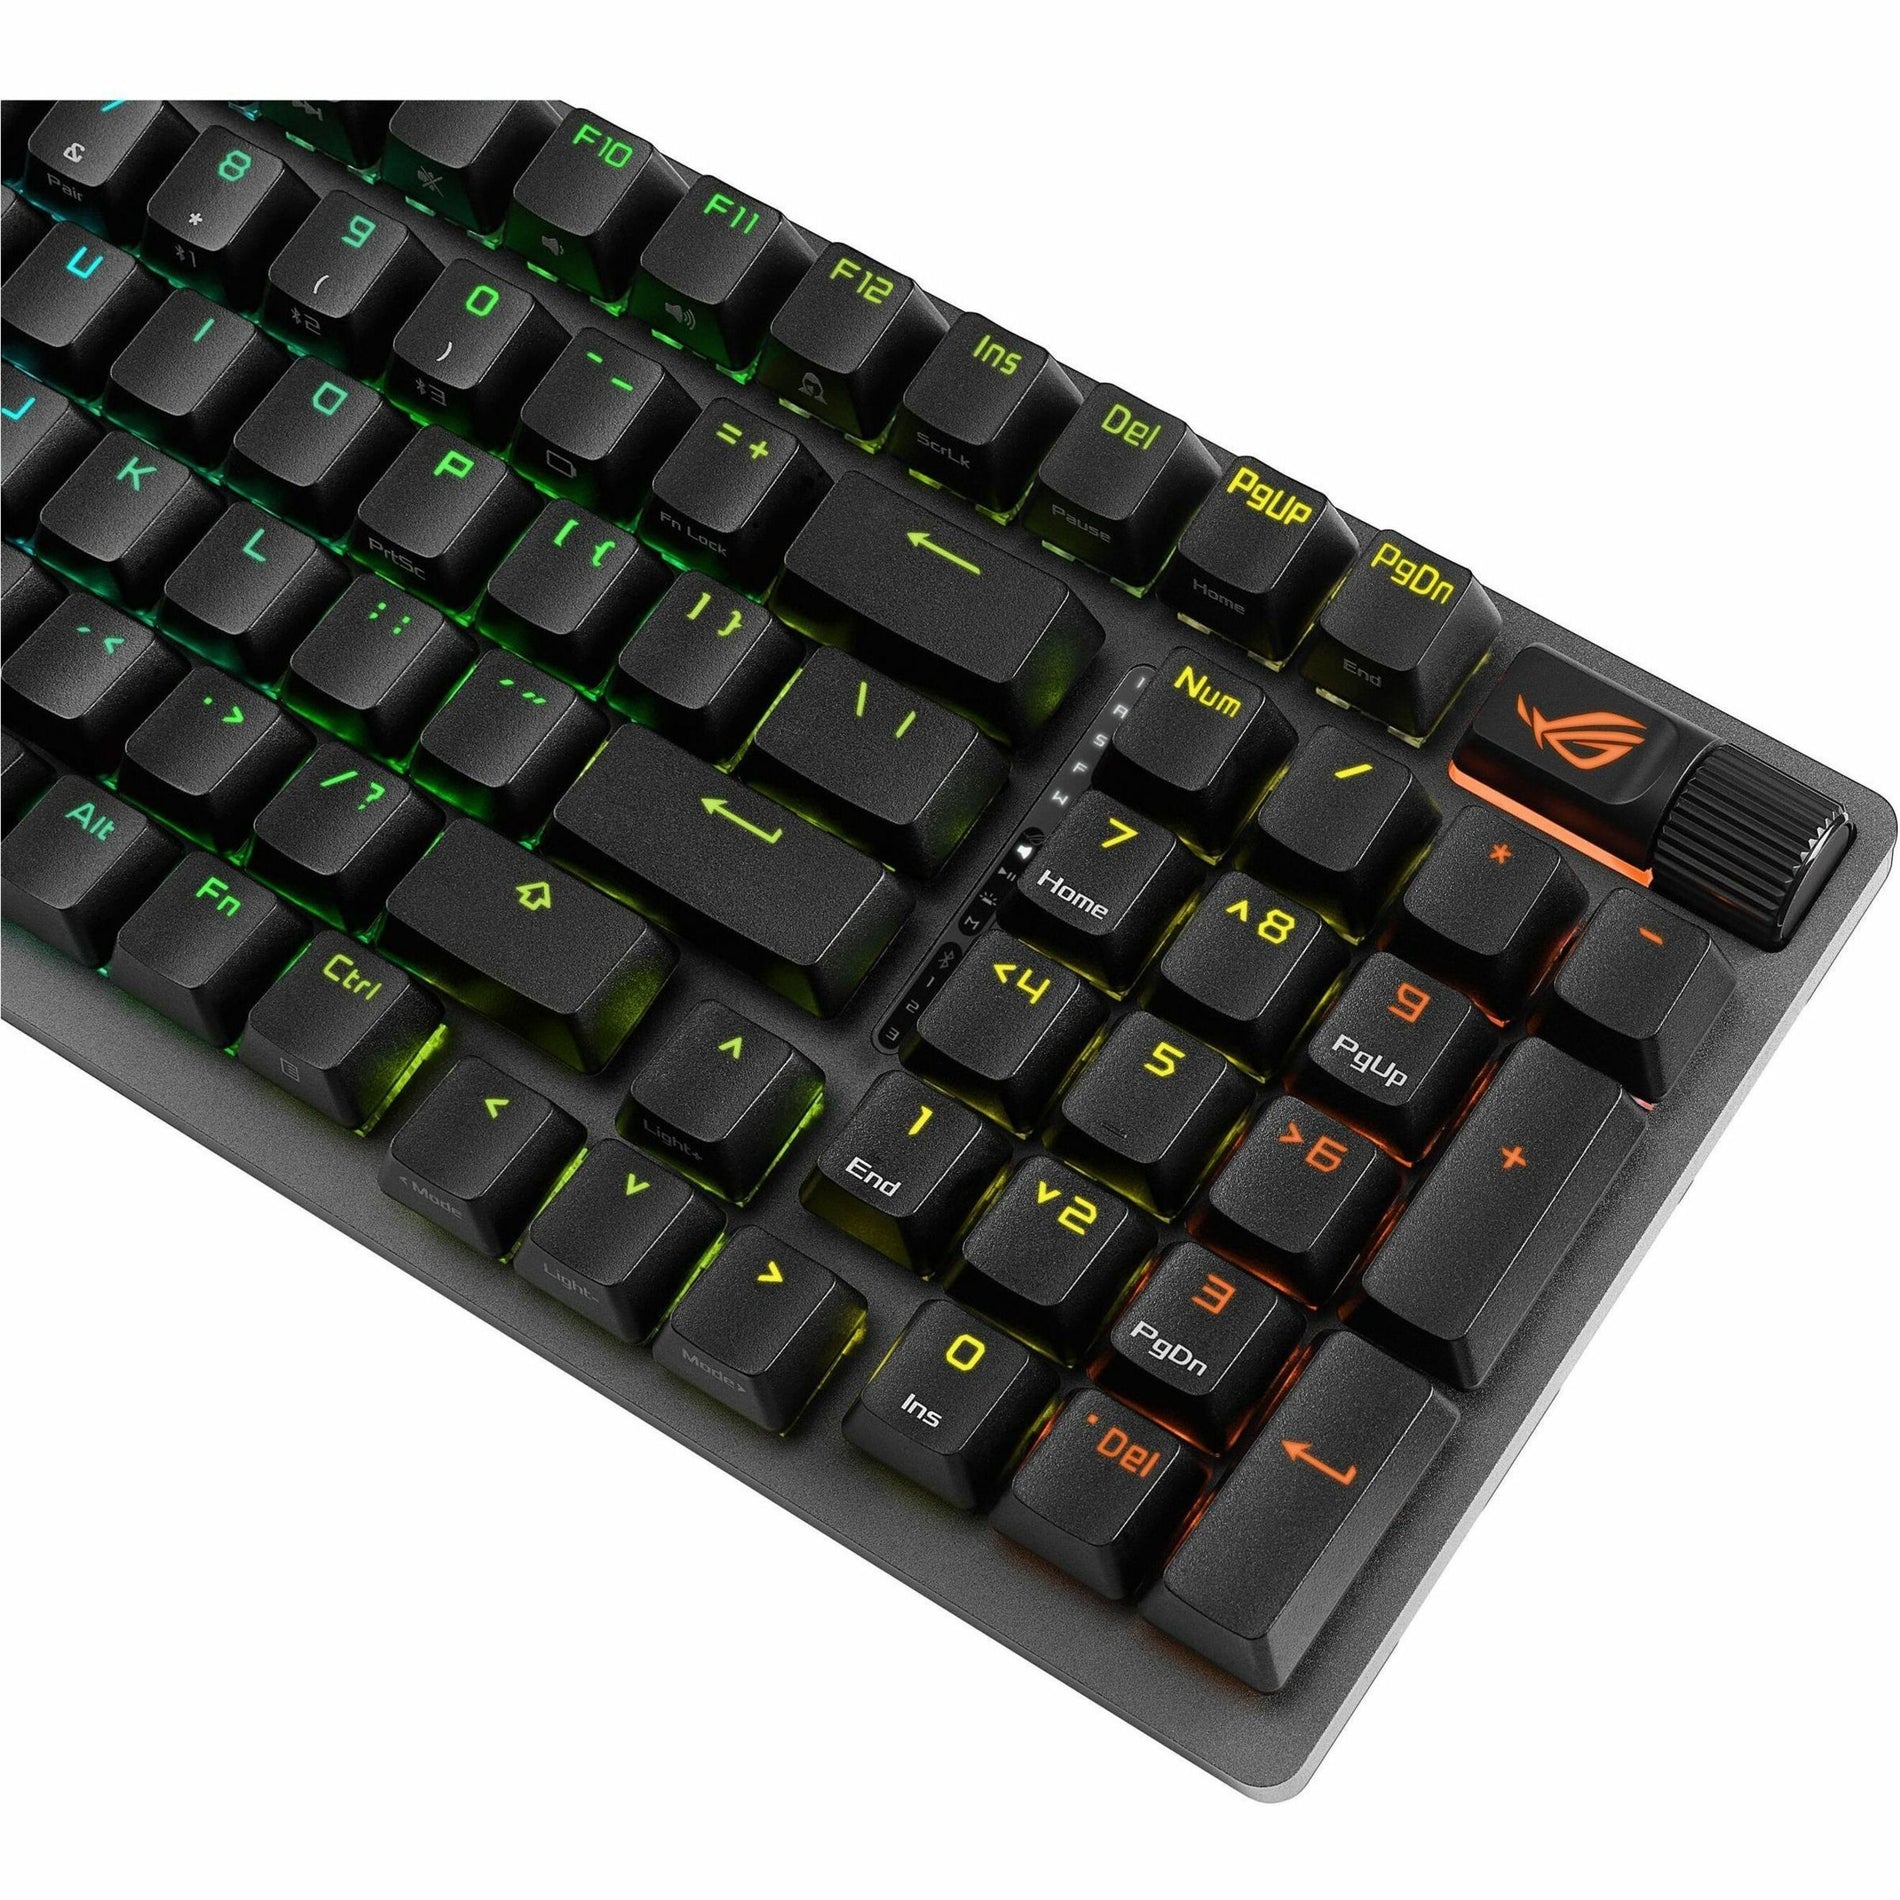 ASUS ROG Strix Scope II 96 Wireless Gaming Keyboard, Tri-Mode Connection, Dampening Foam & Switch-Dampening Pads, Hot-Swappable Pre-lubed ROG NX Snow Switches, PBT Keycaps, RGB-Black (X901STRIXSCOPEII96WLNX)